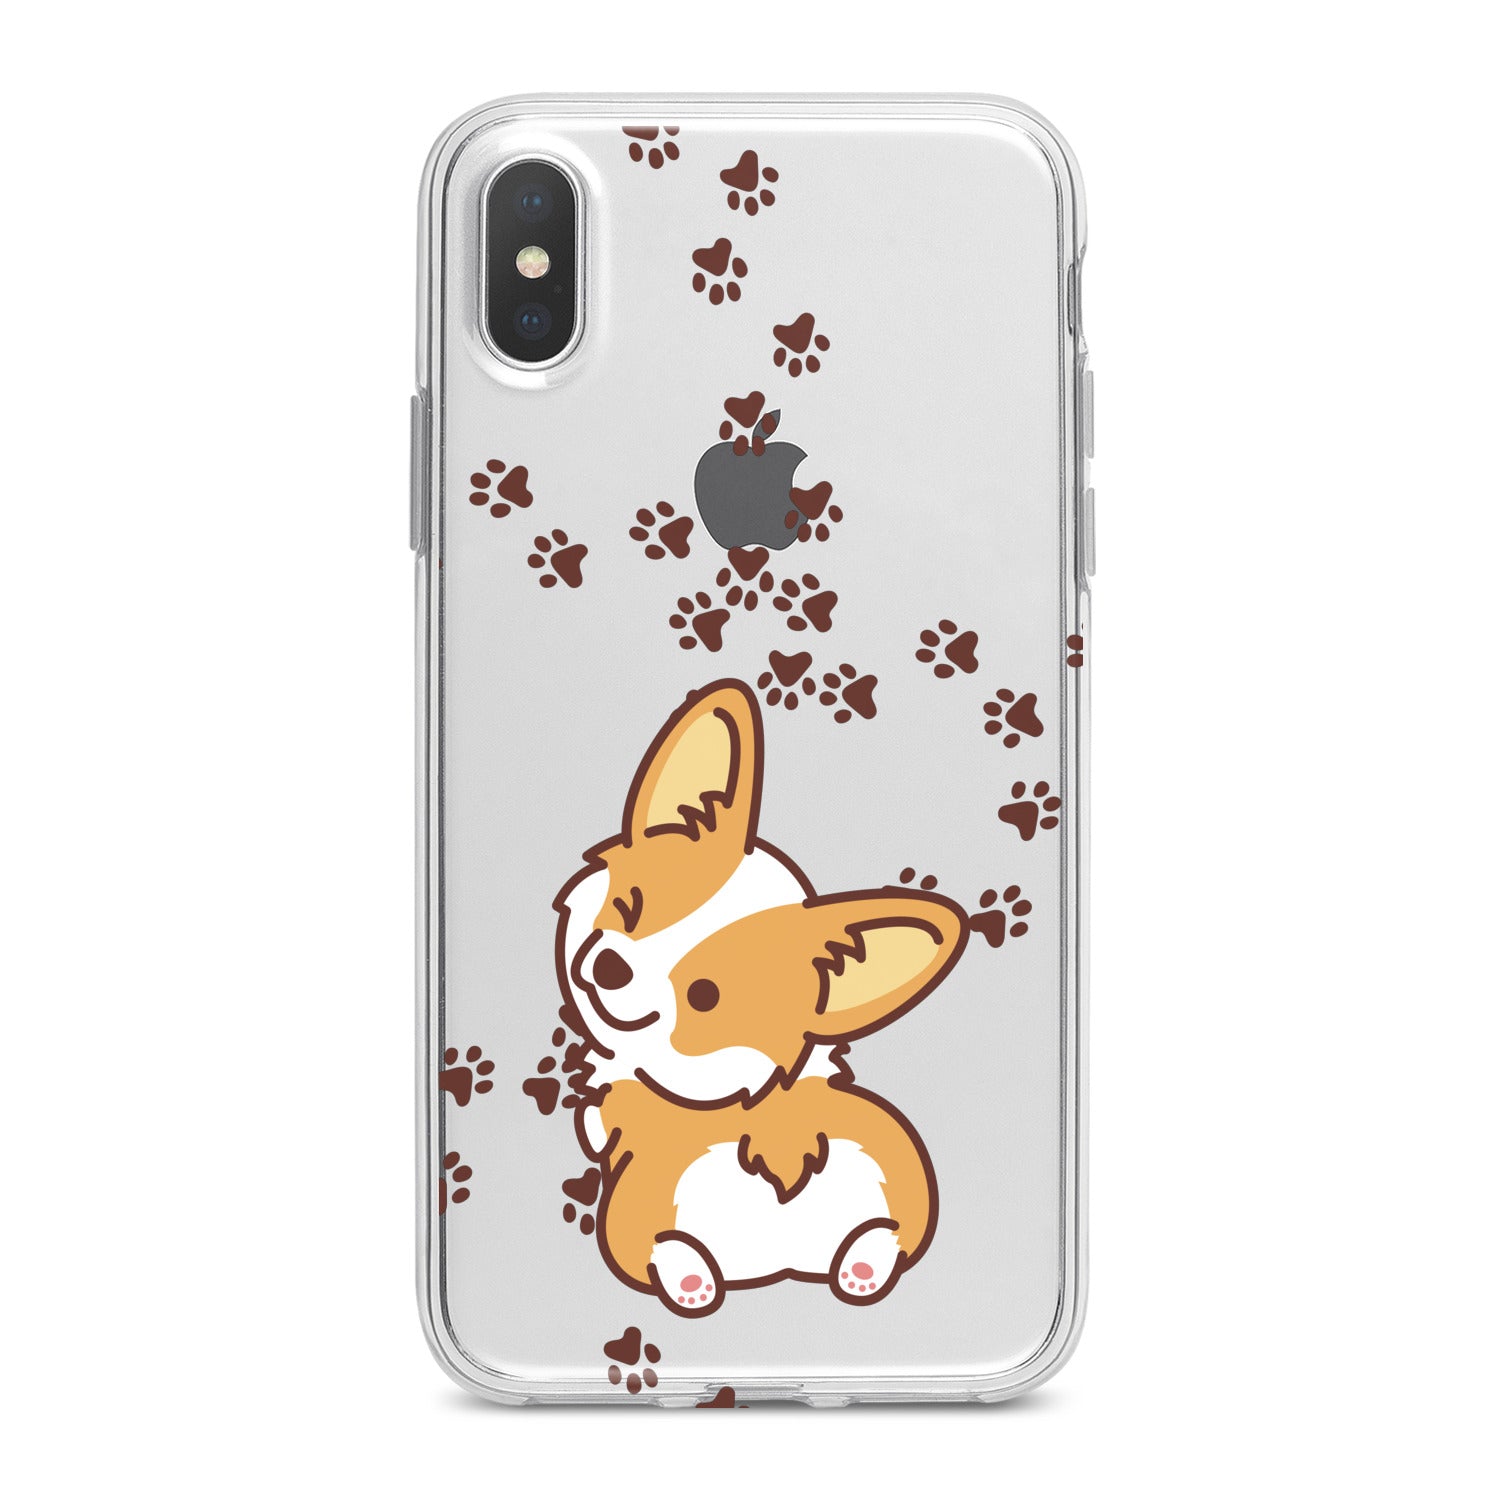 Lex Altern Puppy Corgi Phone Case for your iPhone & Android phone.